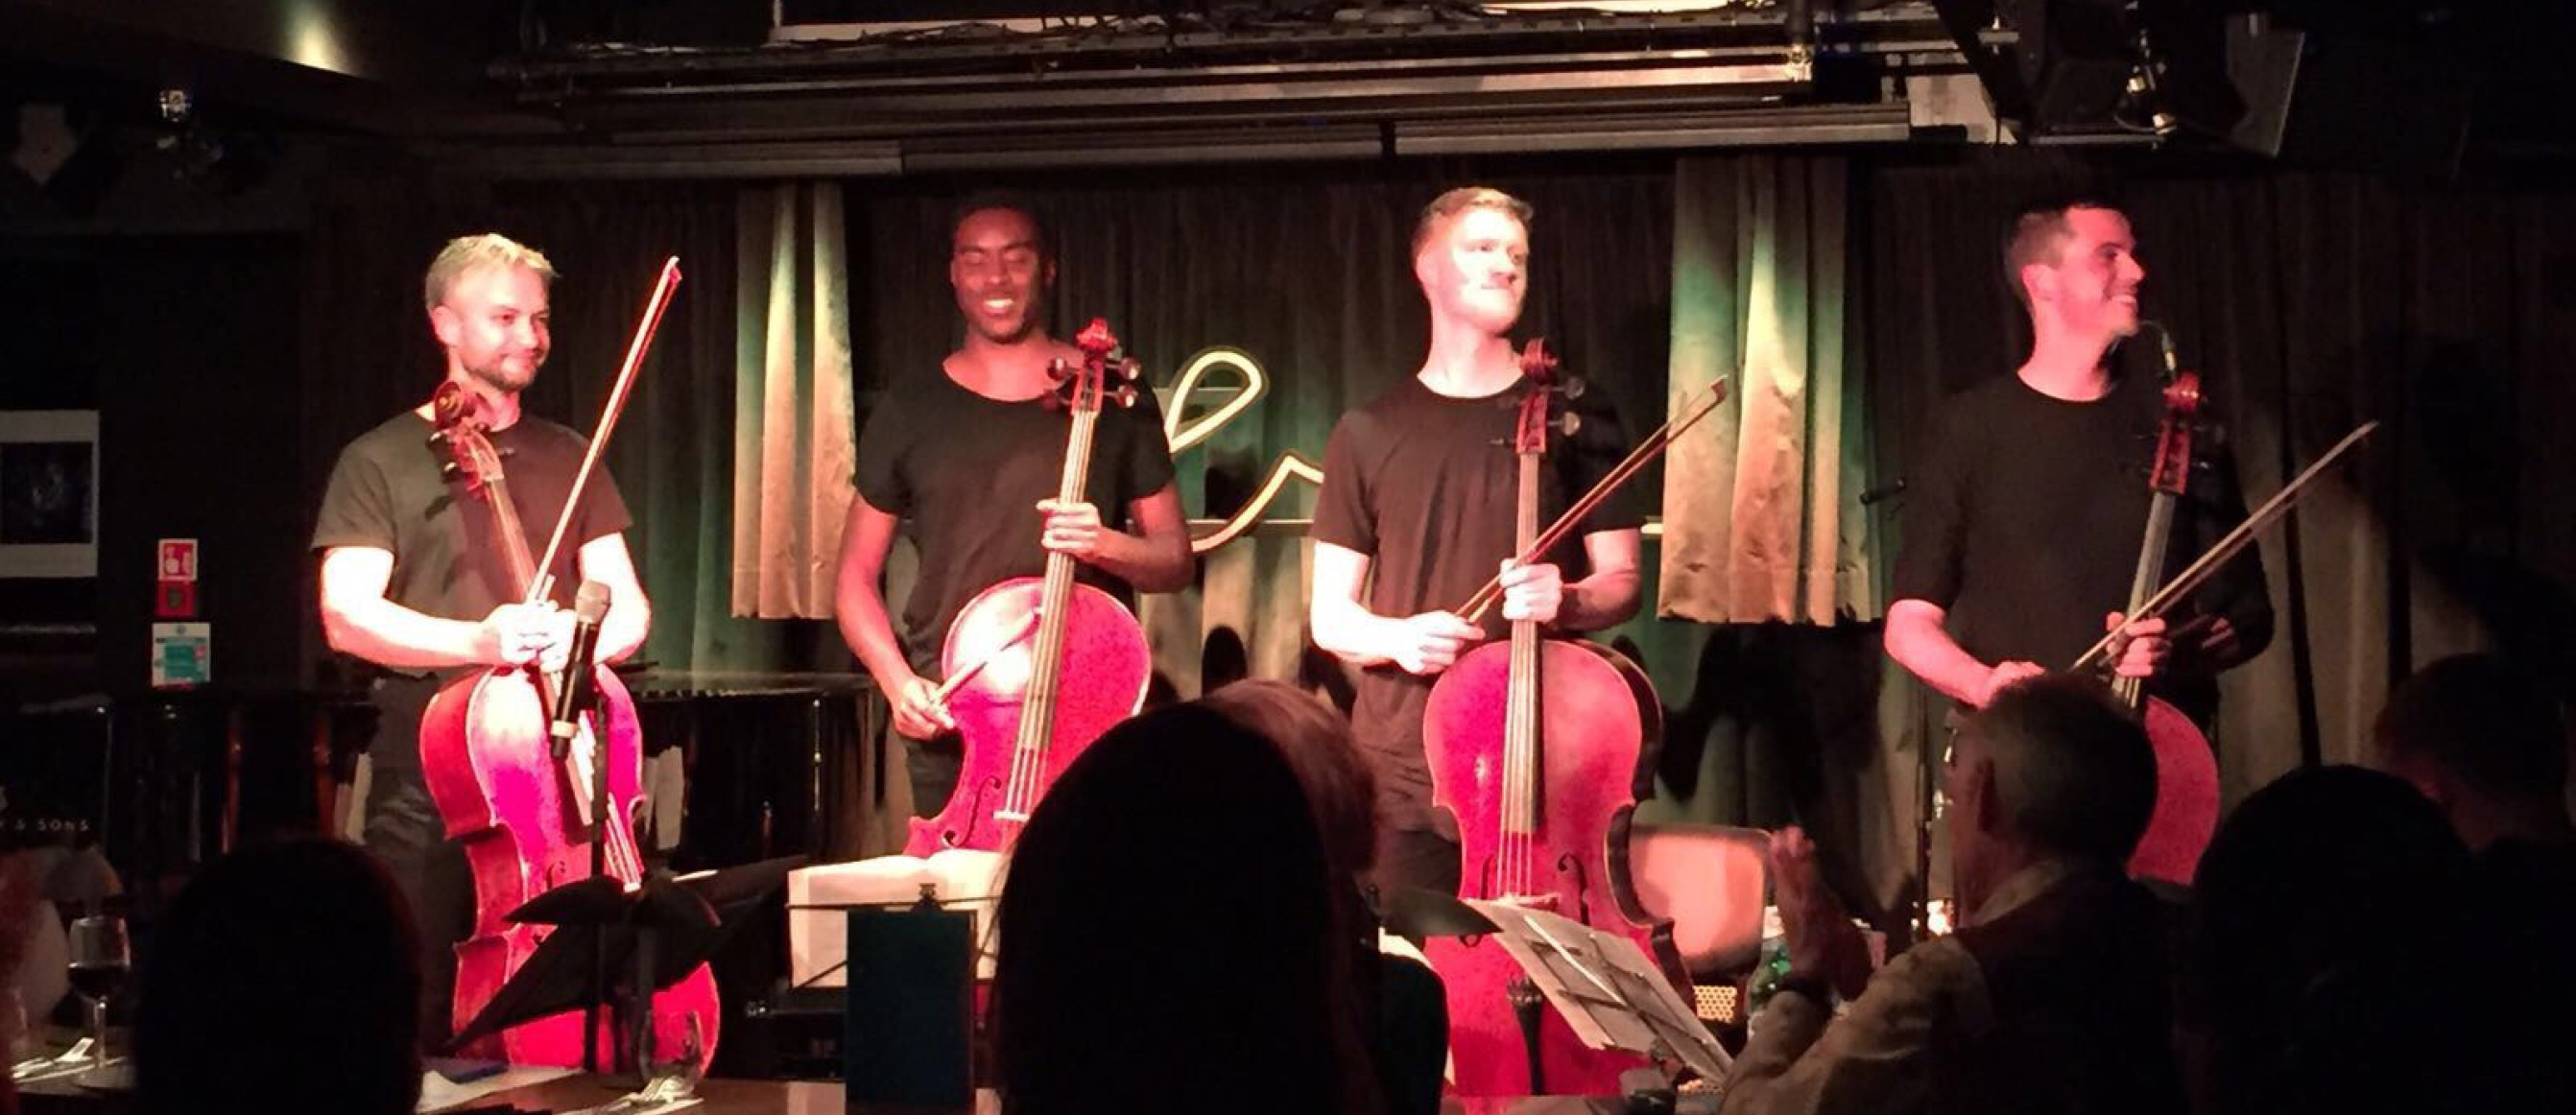 London Bands for Hire | Cover Bands | Weddings | Events - Cello4